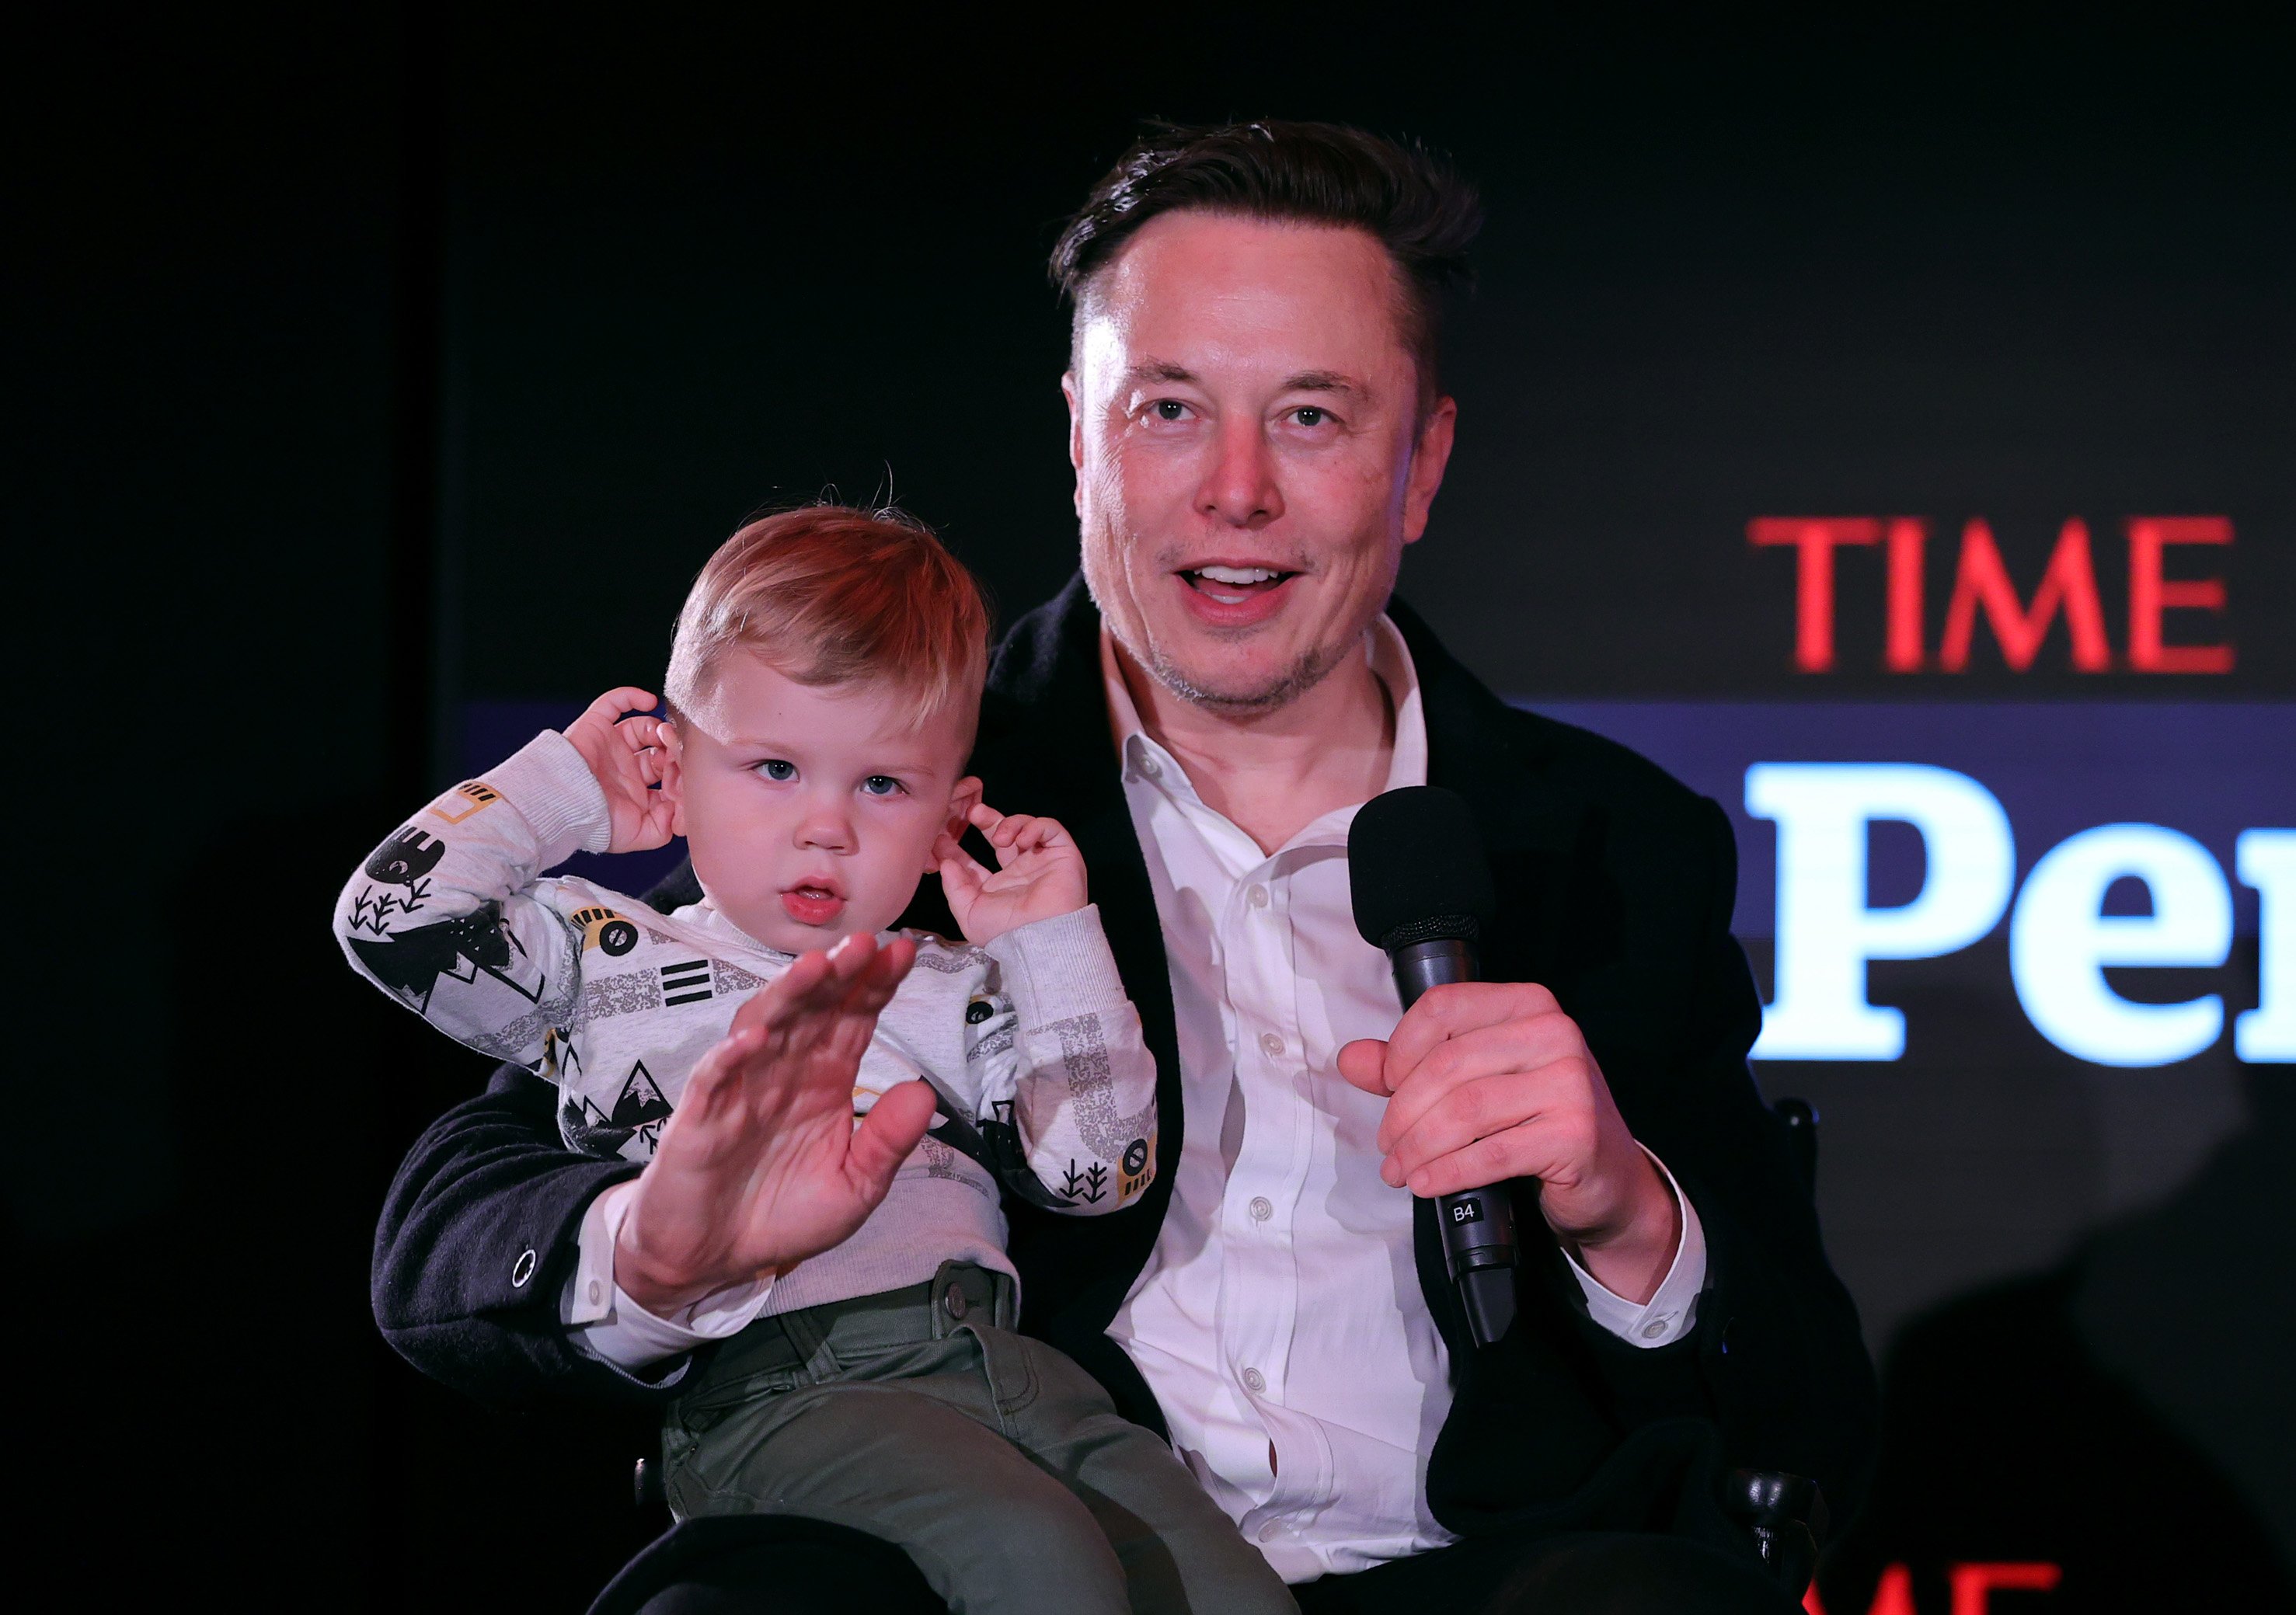 Elon Musk and son X Æ A-12 on stage TIME Person of the Year on December 13, 2021 in New York City. | Photo: Getty Images